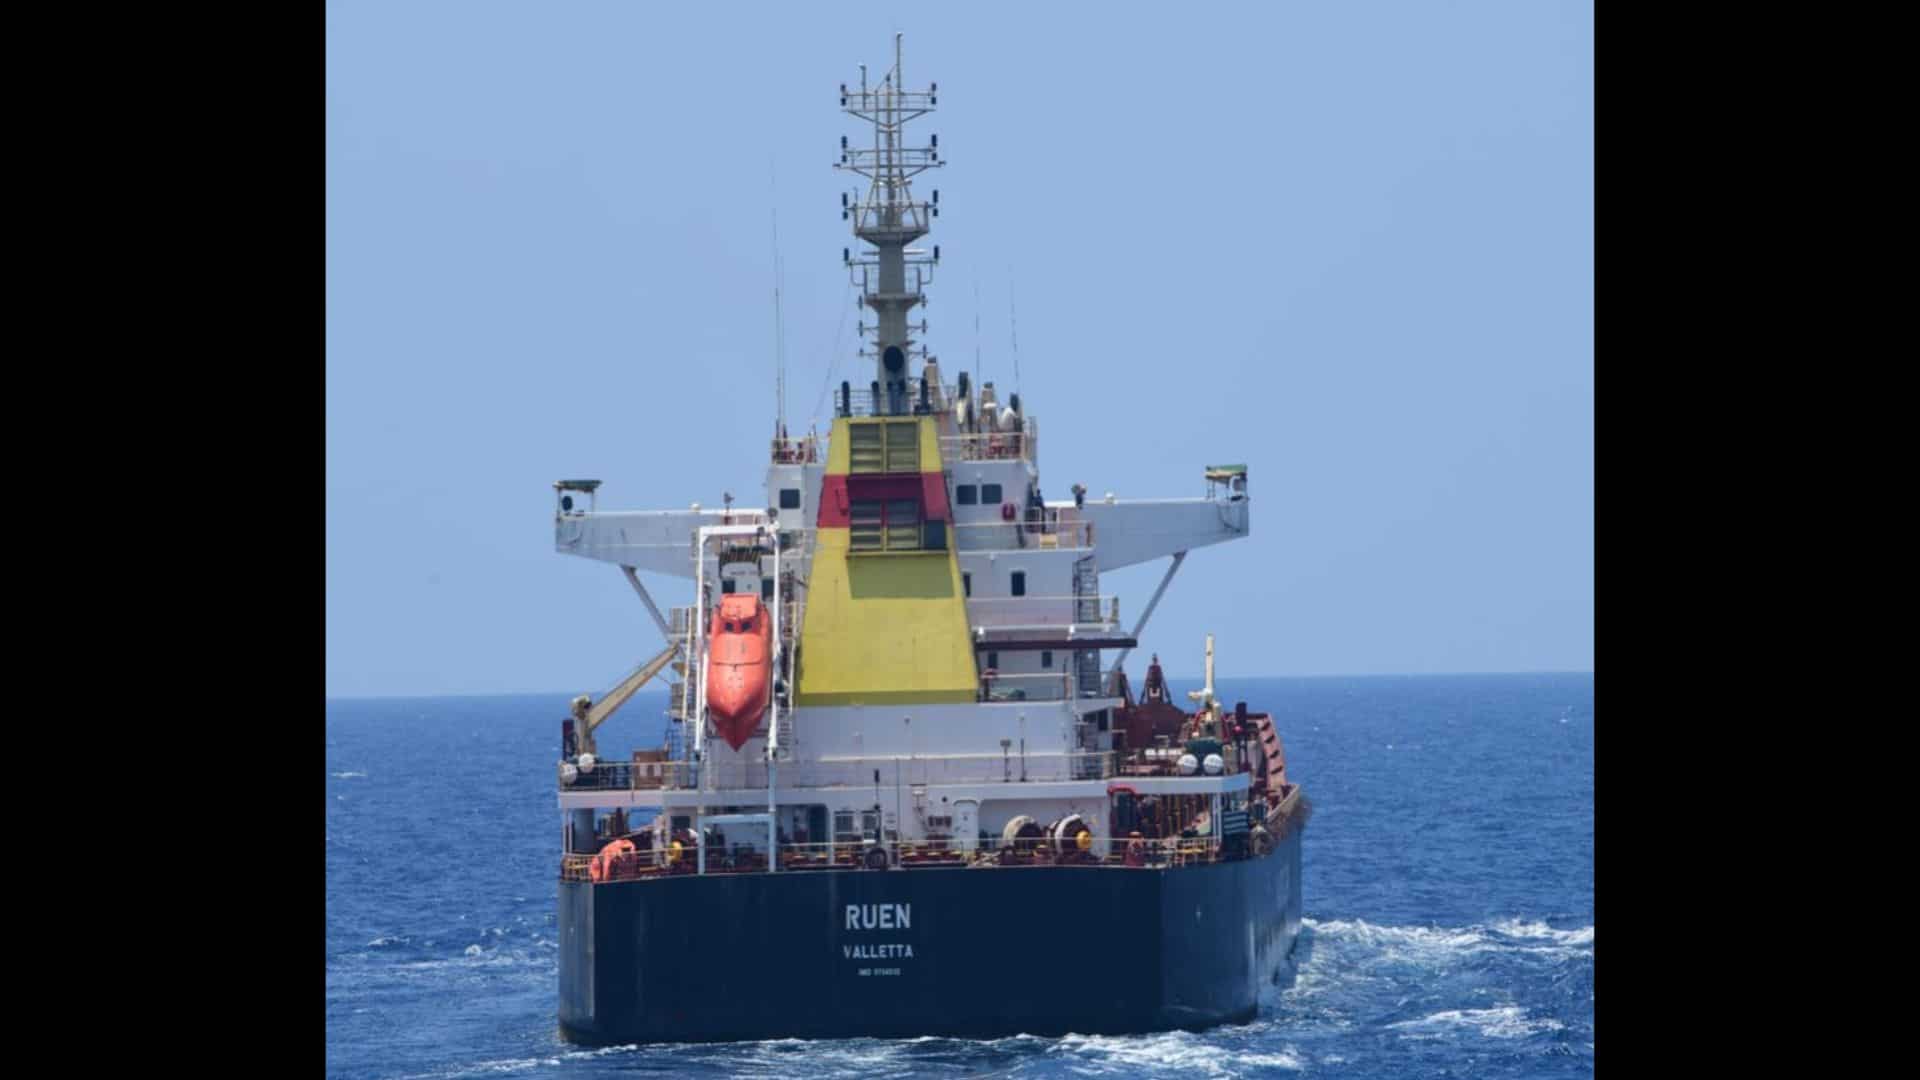 Indian Navy completes operation, makes 35 Somali pirates on board vessel MV Ruen resign, rescues crew